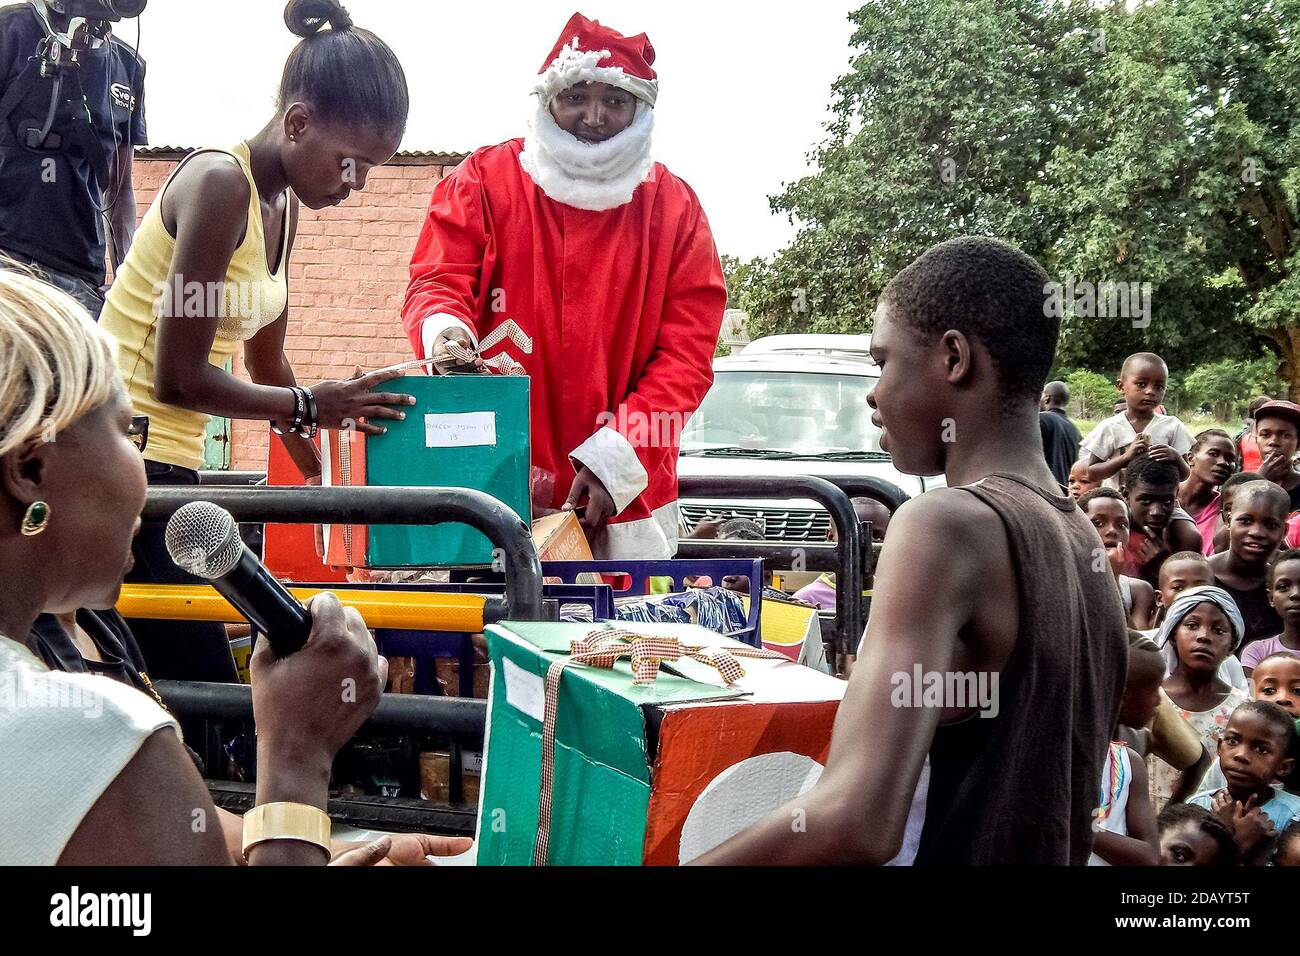 Children gather to see Santa Claus and receive gifts during the event “Santa Comes to Makokoba,” at the Thabiso Youth Centre in Bulawayo, Zimbabwe Stock Photo